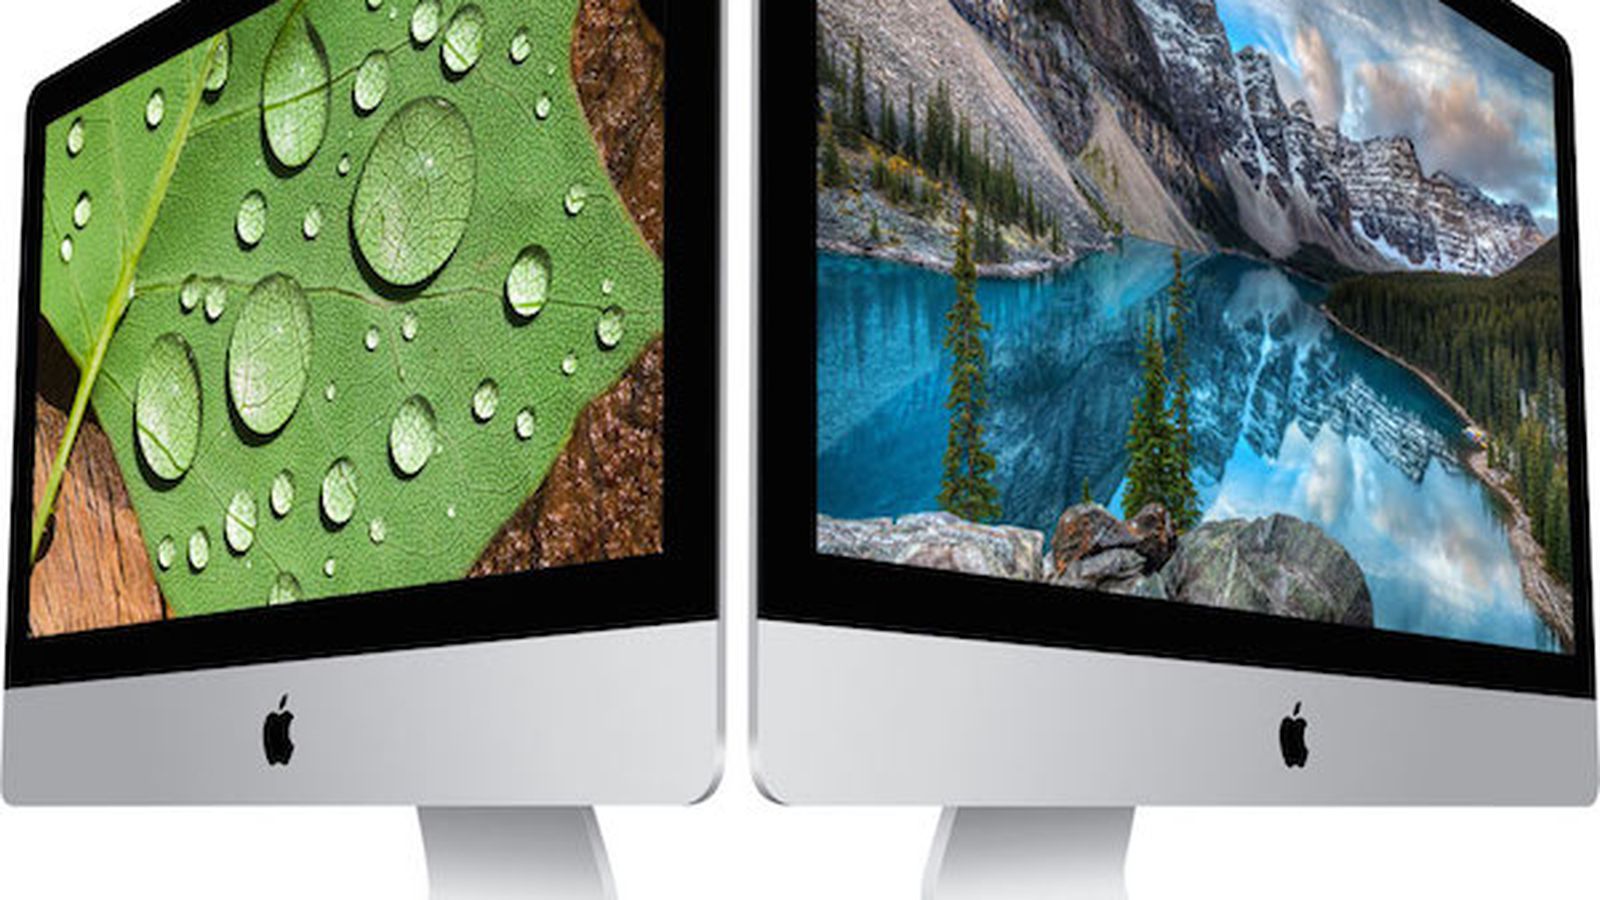 2015 iMac Reviews: 'Best All-in-One' Desktop, But Lacks USB-C and